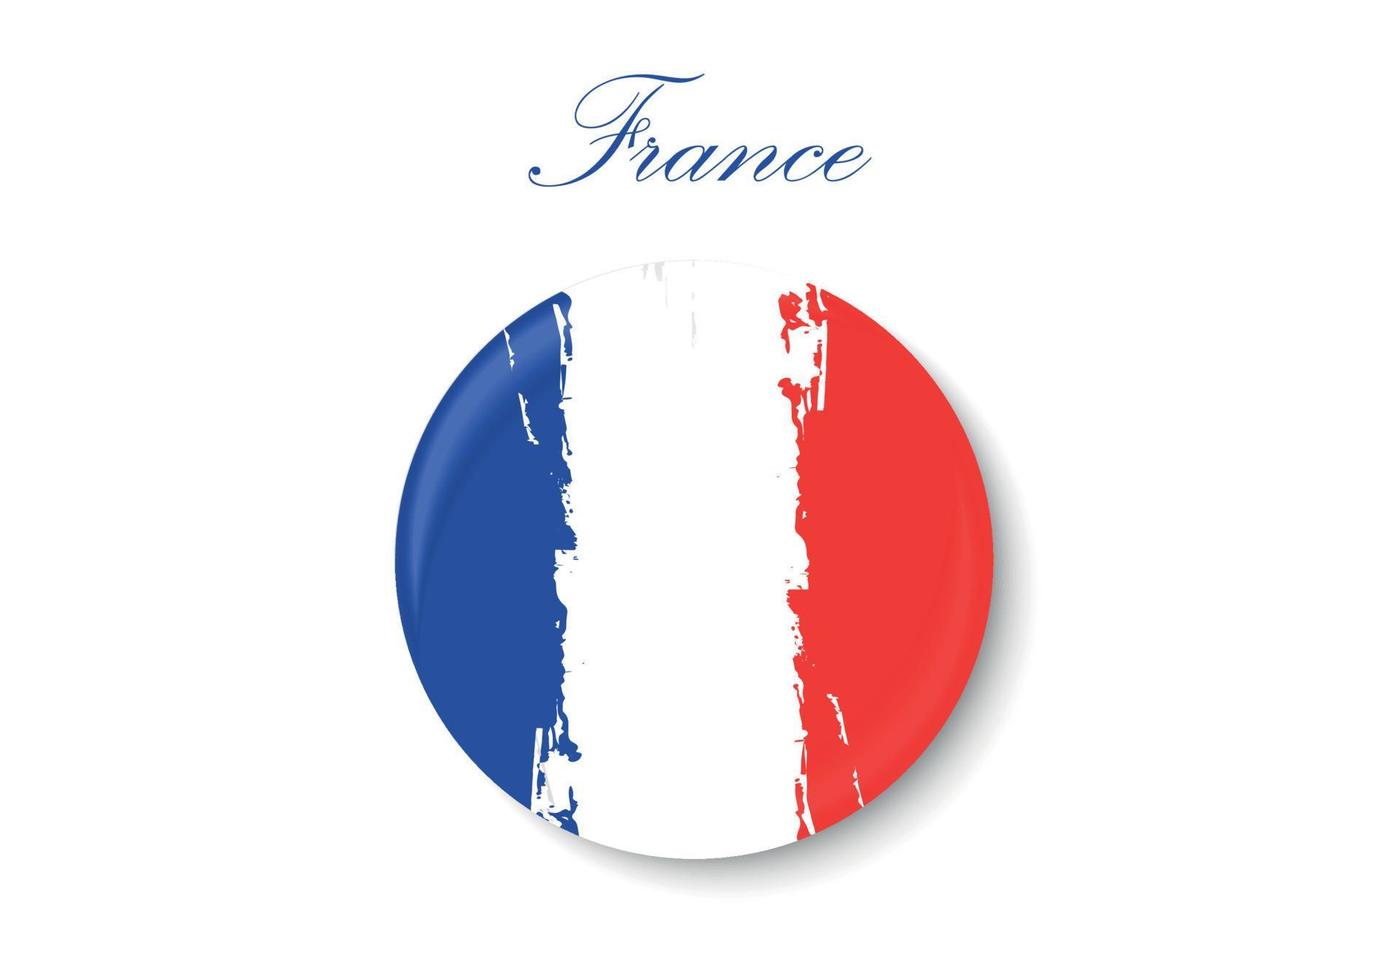 The flag of France. Standard color. The circular icon. The round flag. Digital illustration. Computer illustration. Vector illustration.